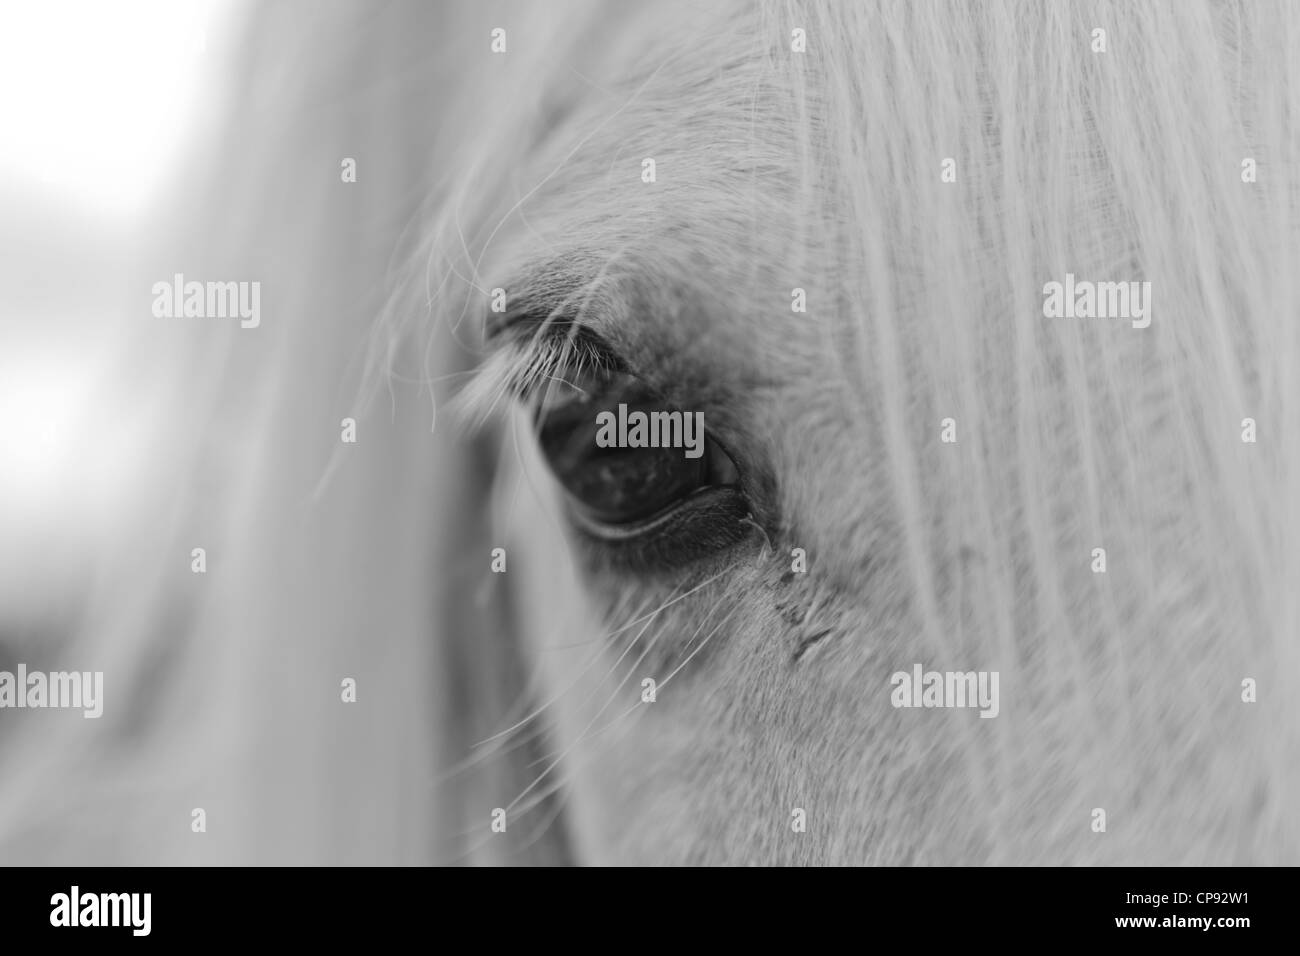 Close up of the eye of a white horse Stock Photo